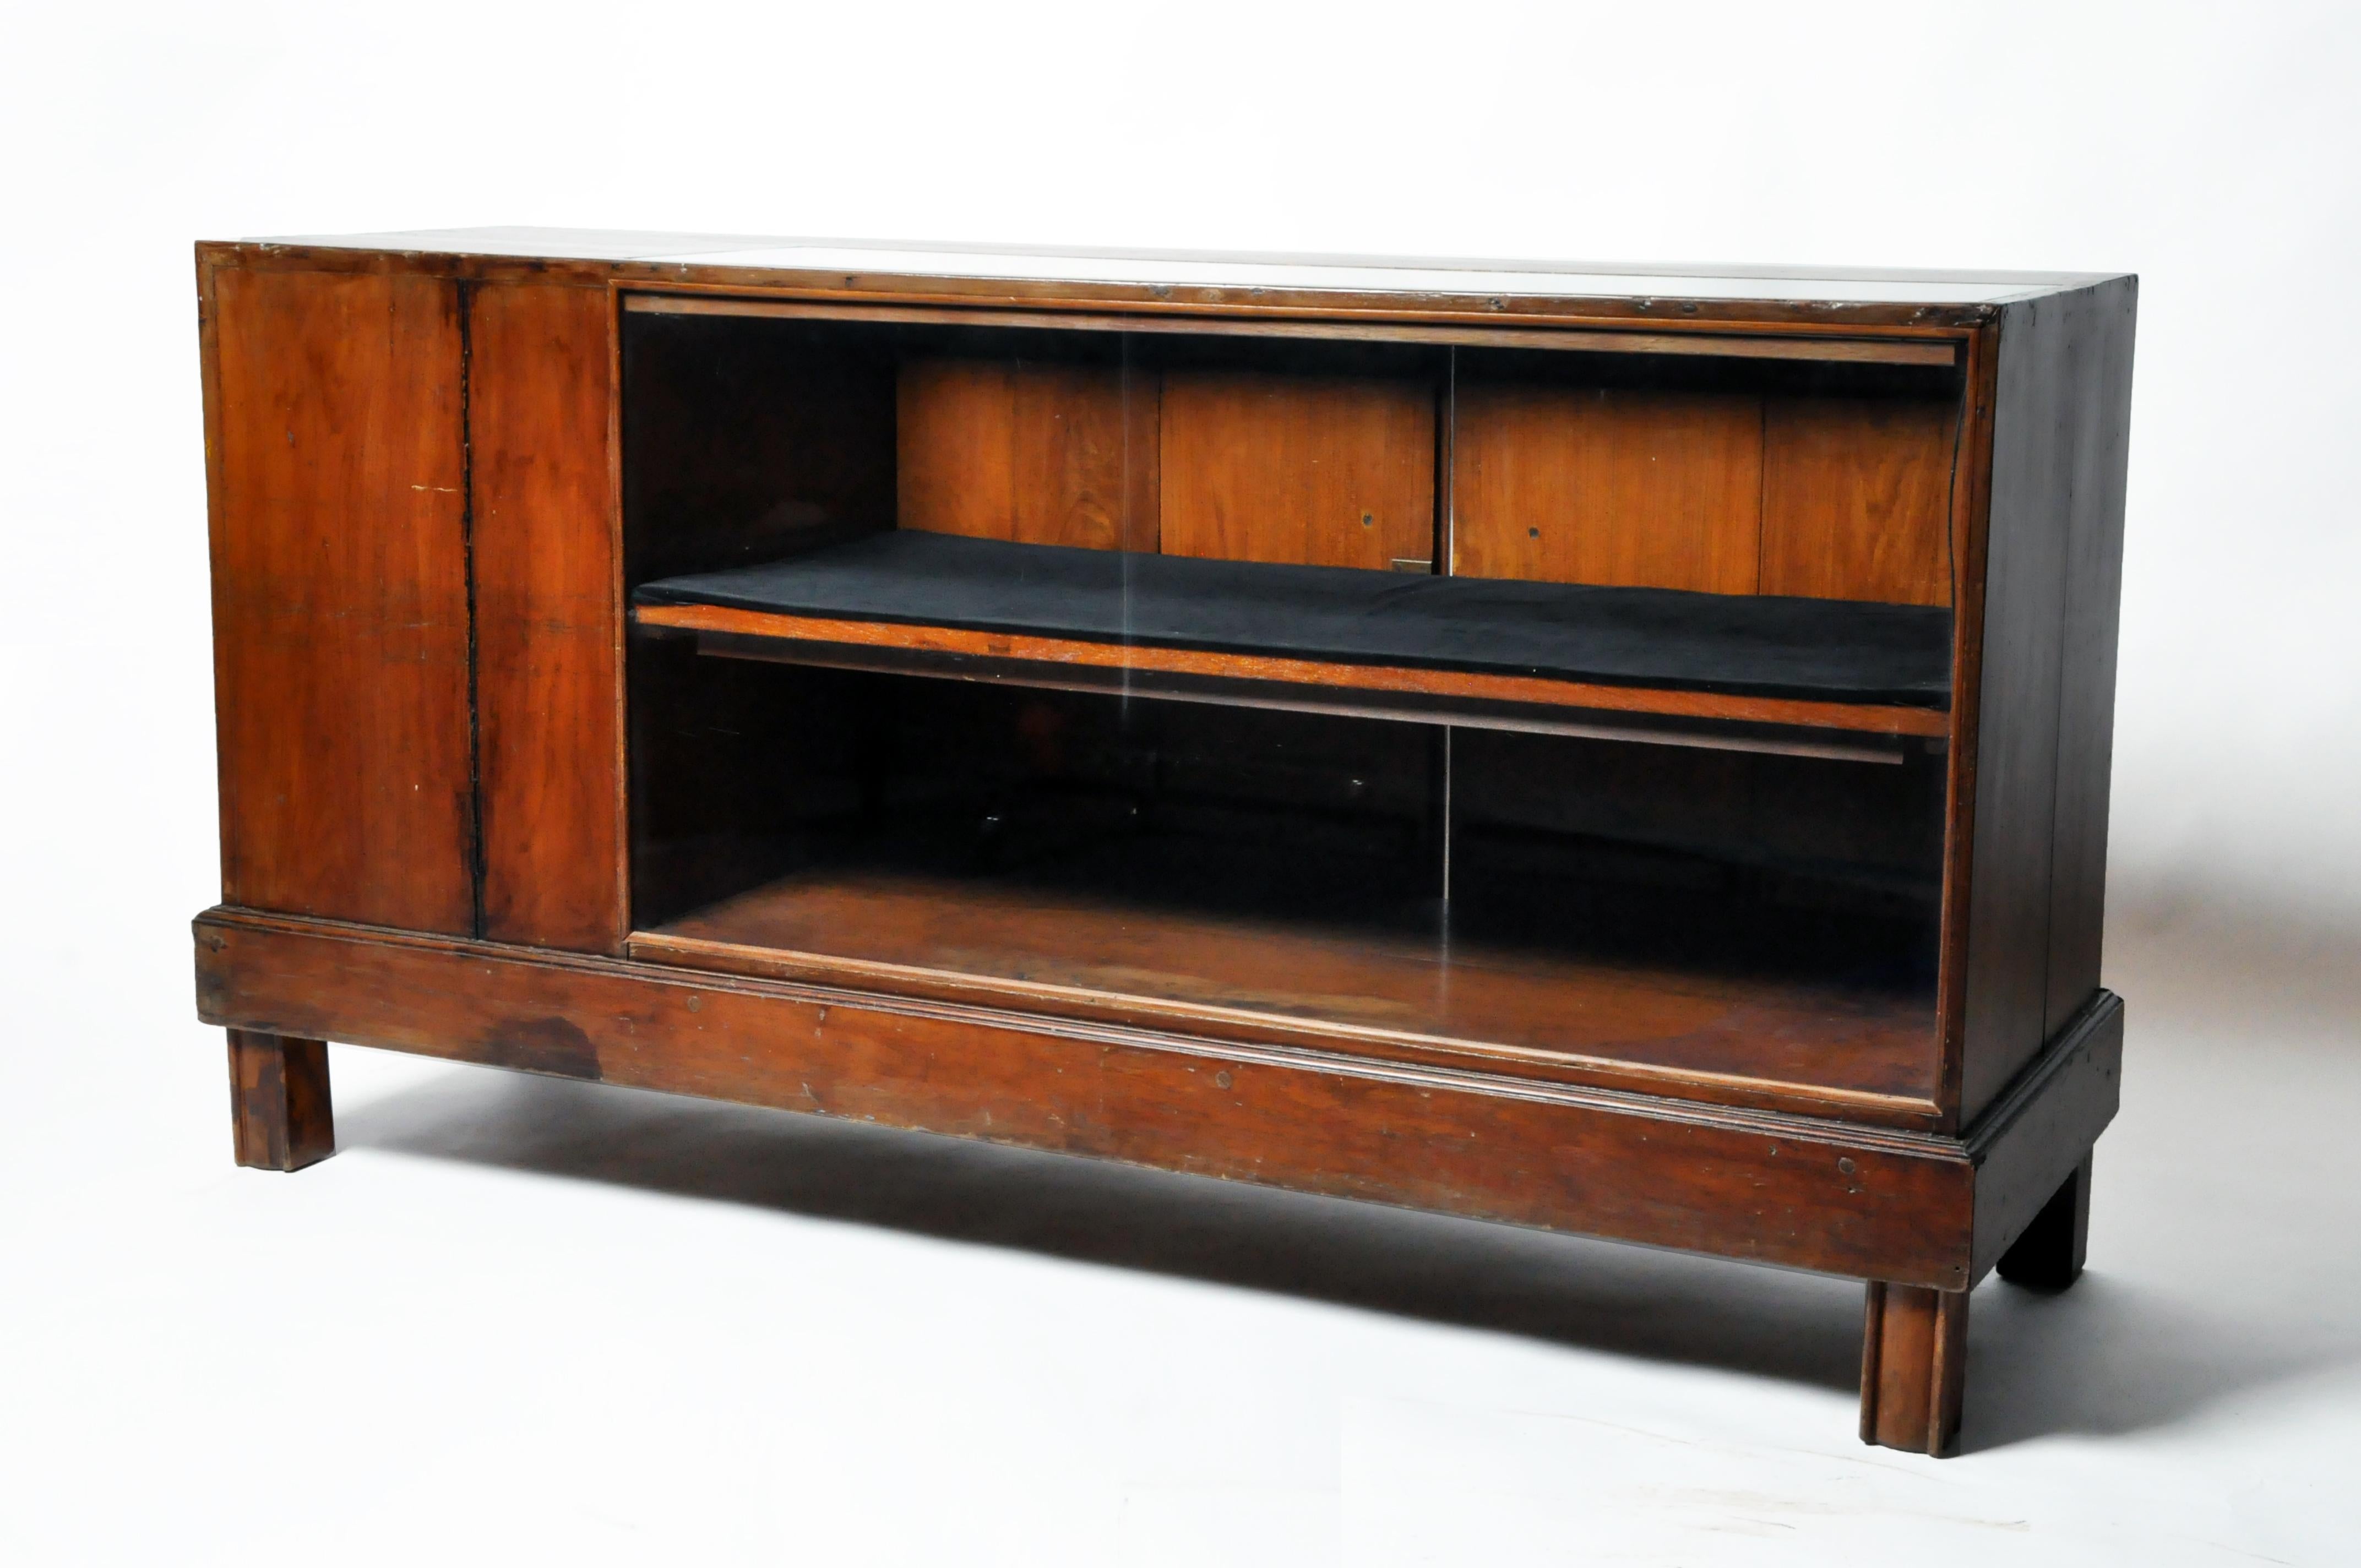 This teak wood display counter was once found in a retail store in Rangoon, Burma. It dates to the early 20th century, c. 1910.  During the colonial era, business boomed throughout what was known as the British Raj; India, Burma and modern Pakistan